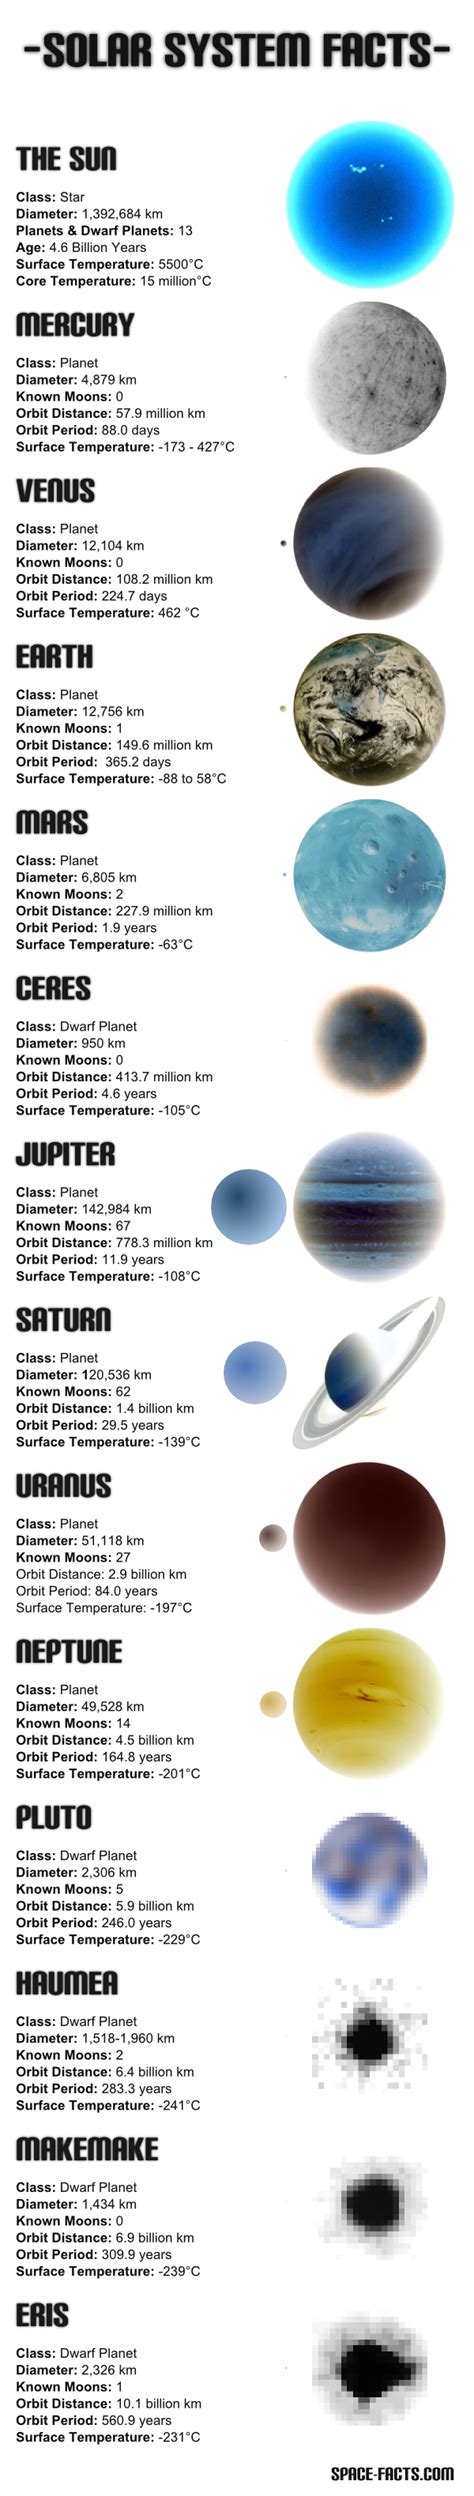 Solar System Planets And Dwarf Planets Information Chart Solar System